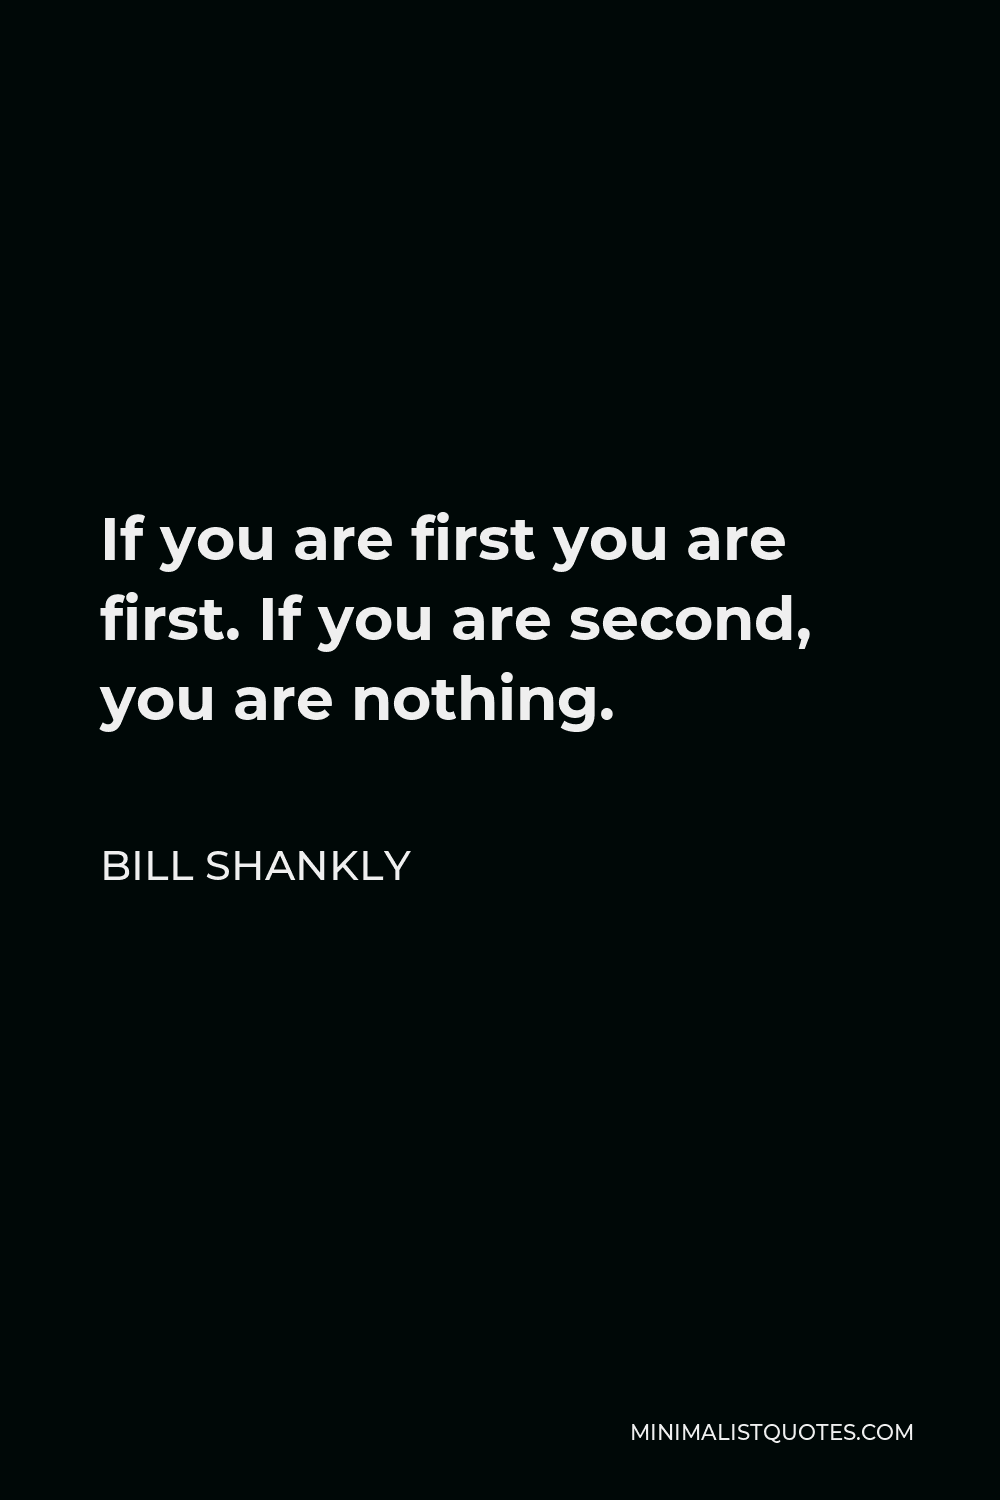 Bill Shankly Quote - If you are first you are first. If you are second, you are nothing.